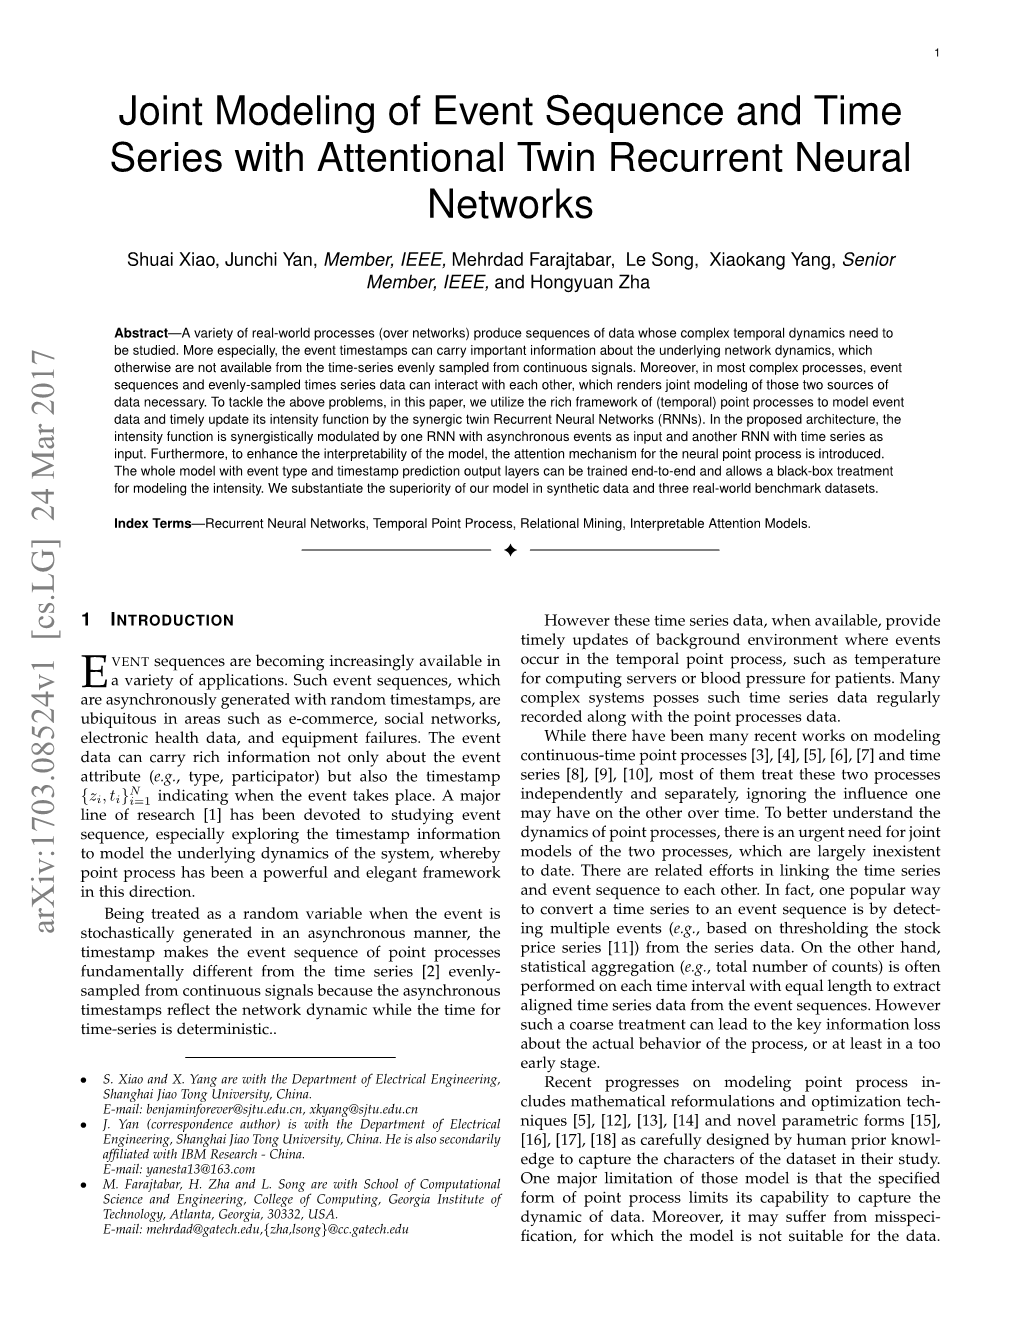 Joint Modeling of Event Sequence and Time Series with Attentional Twin Recurrent Neural Networks